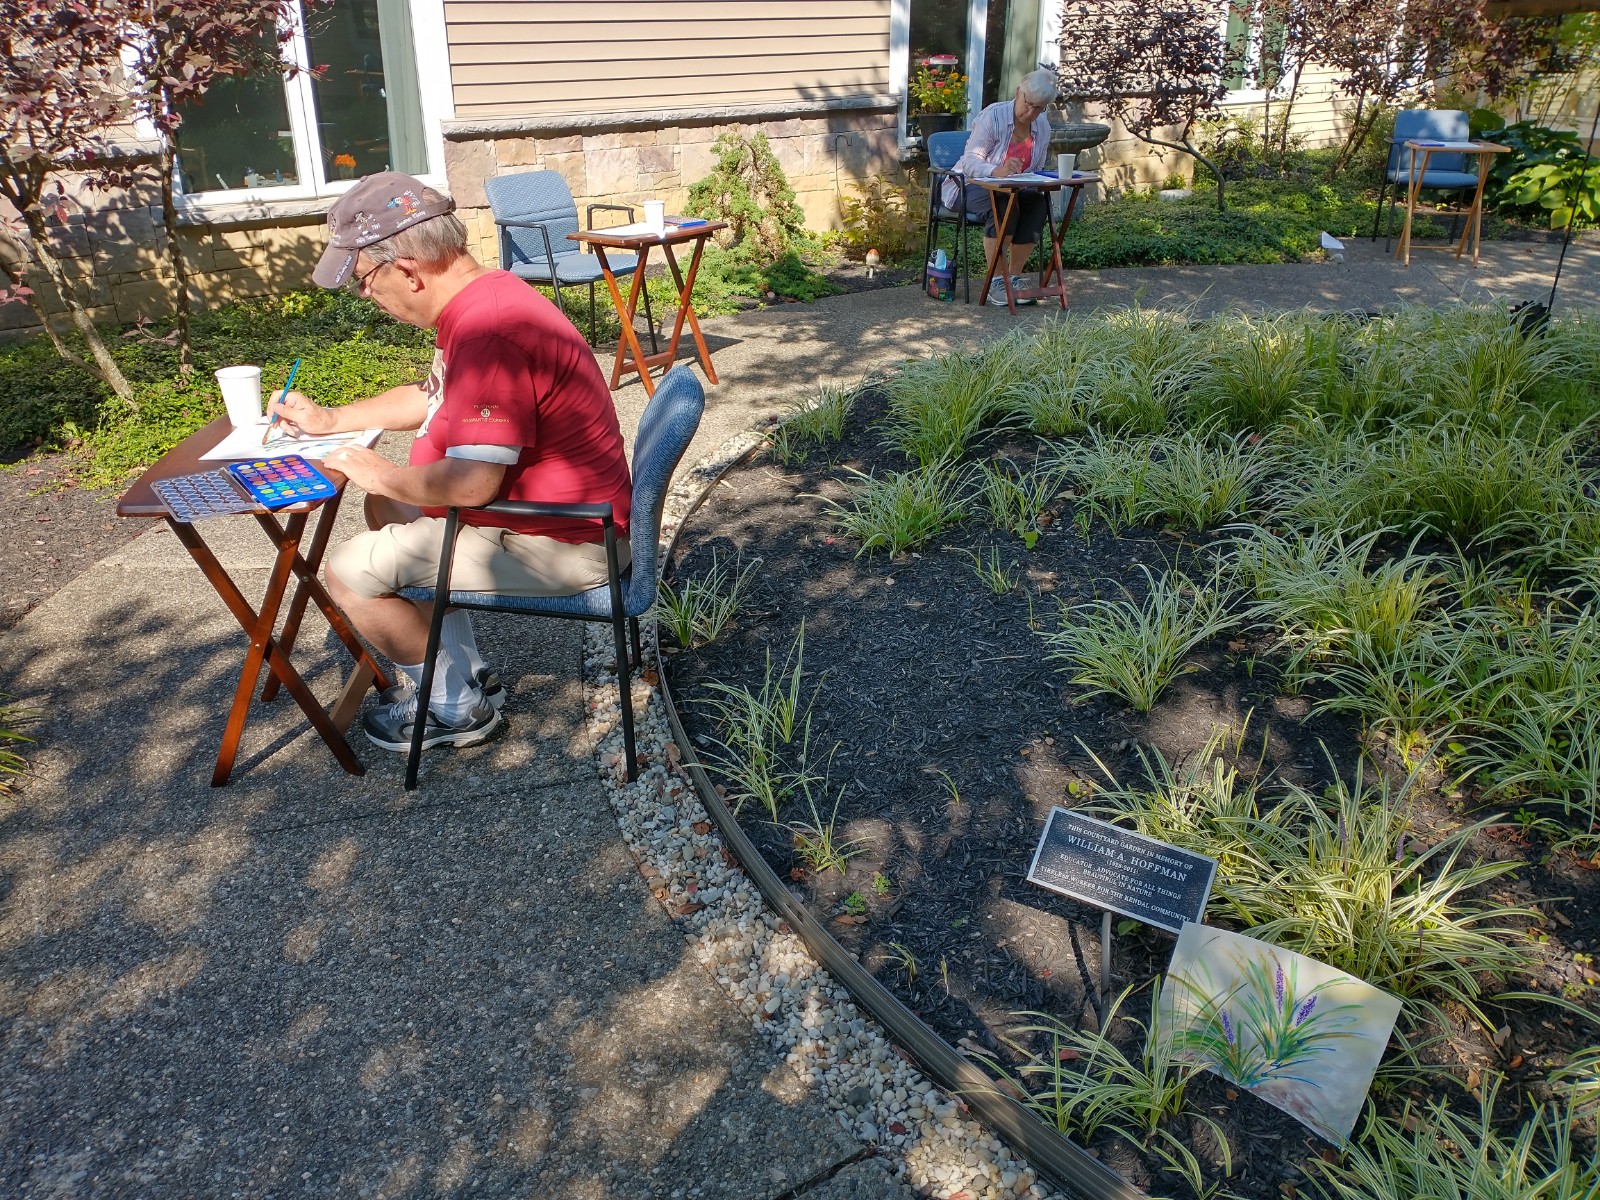 Otterbein Granville residents plein air painting in The Courtyard.